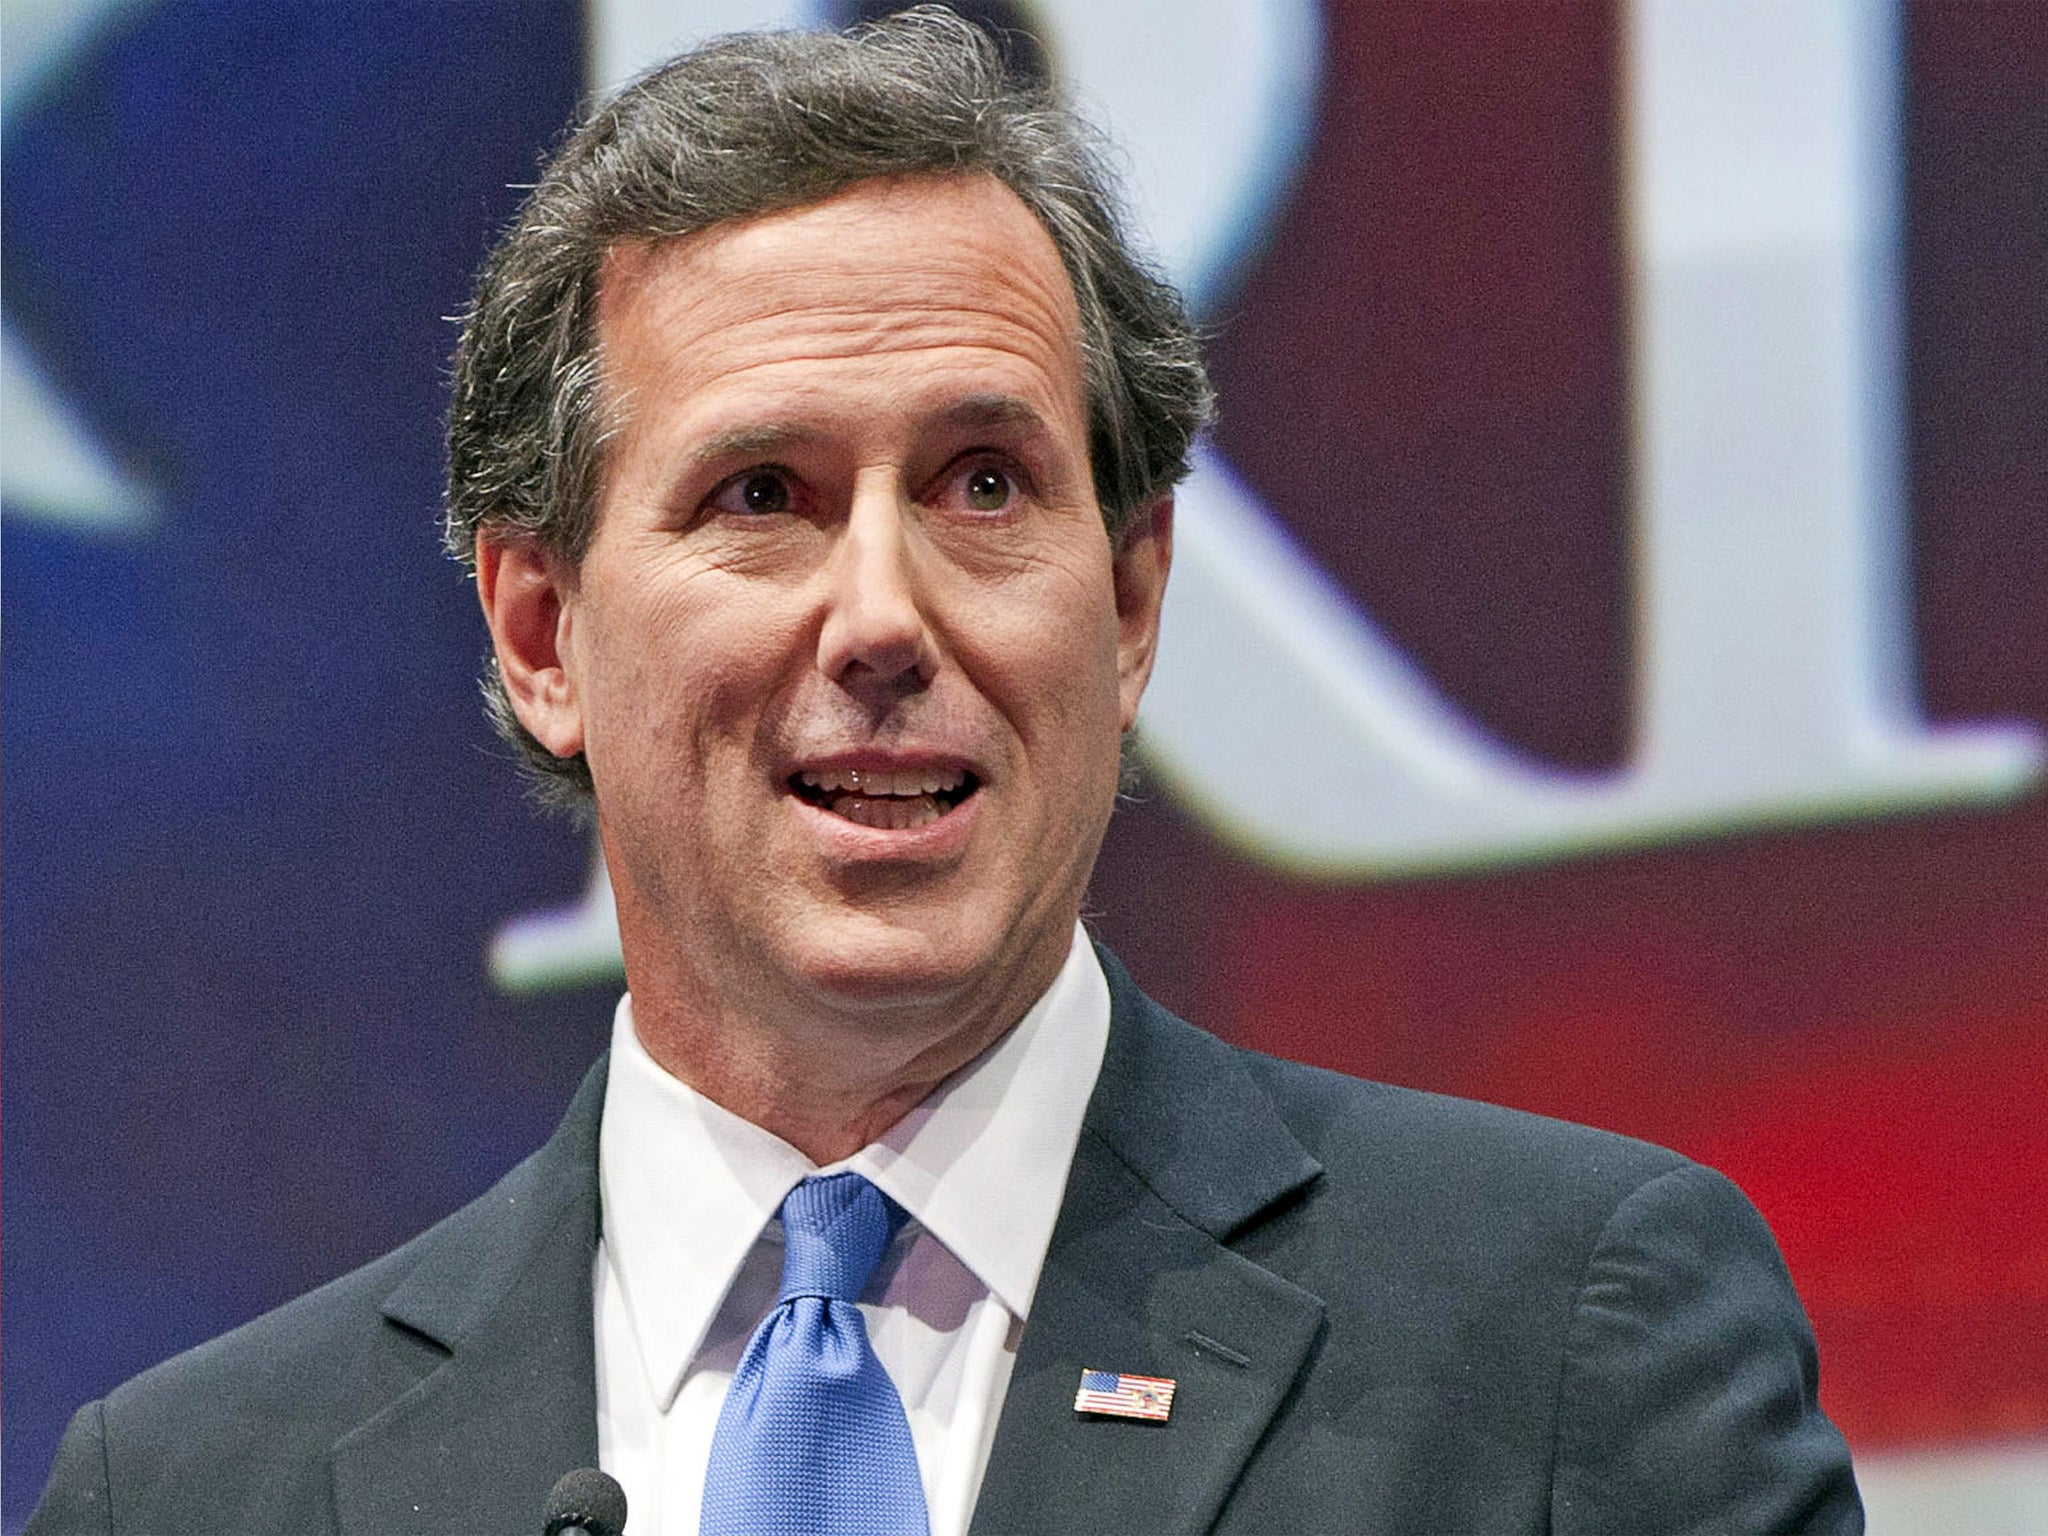 Santorum: 'I just want to portray faith as it really is'